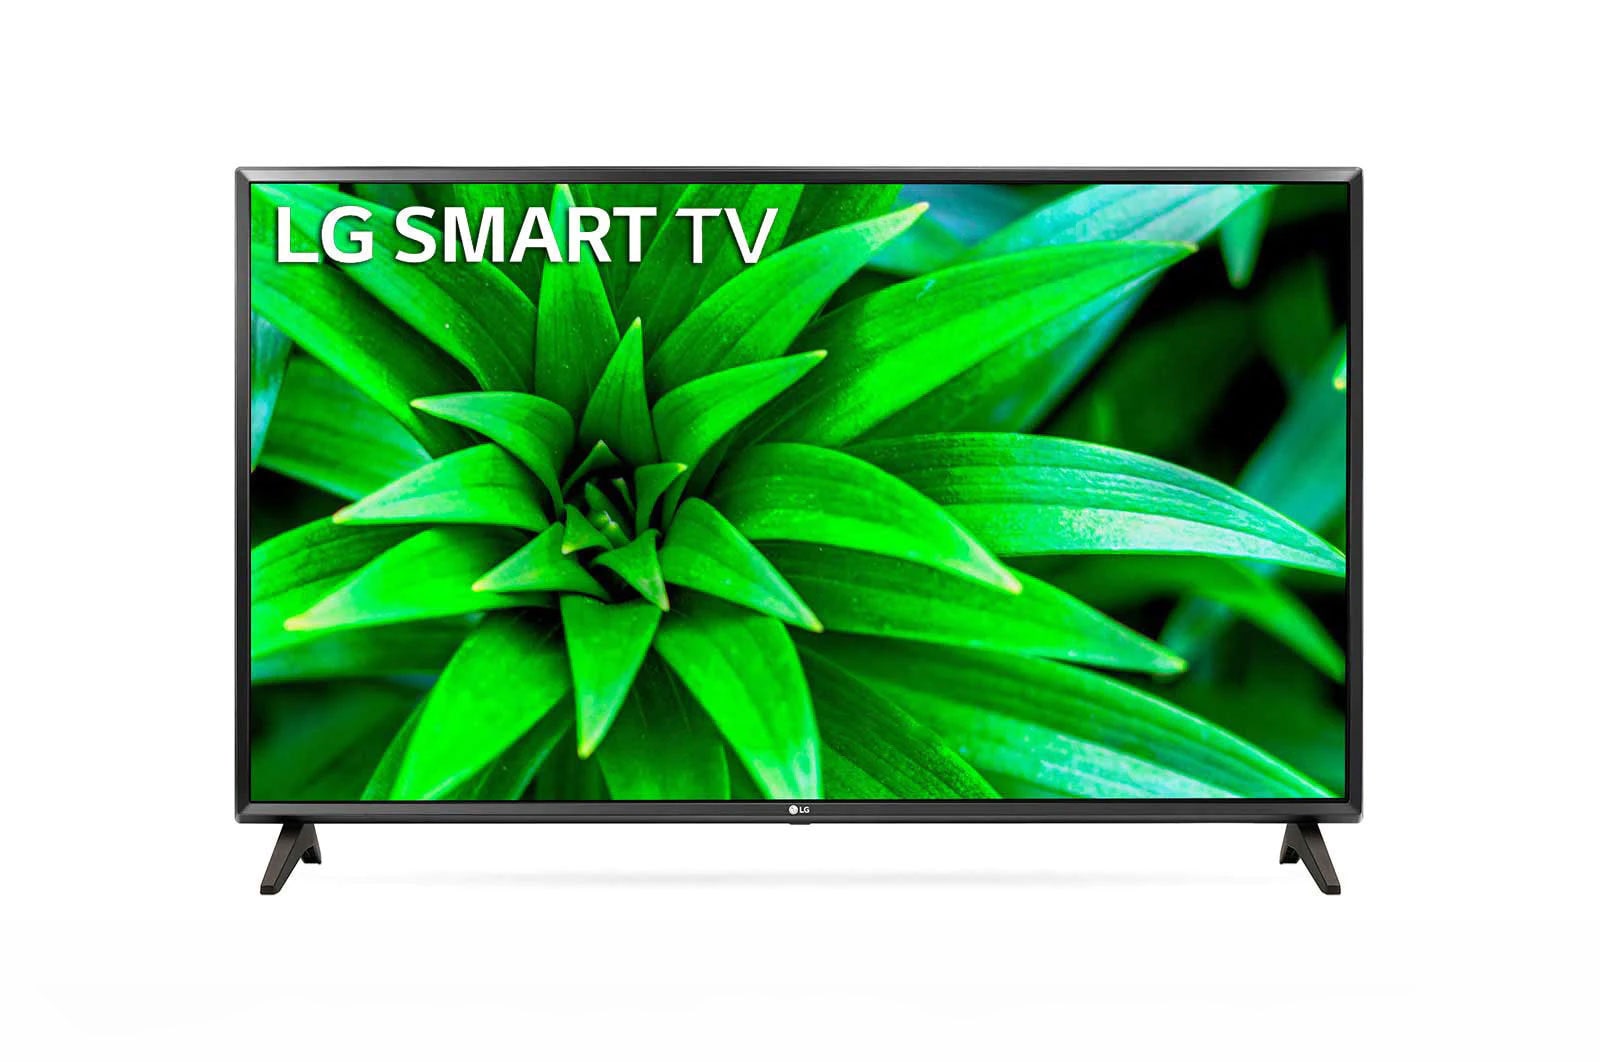 LG Smart TV Connections: Wi-Fi, Miracast, Bluetooth & More